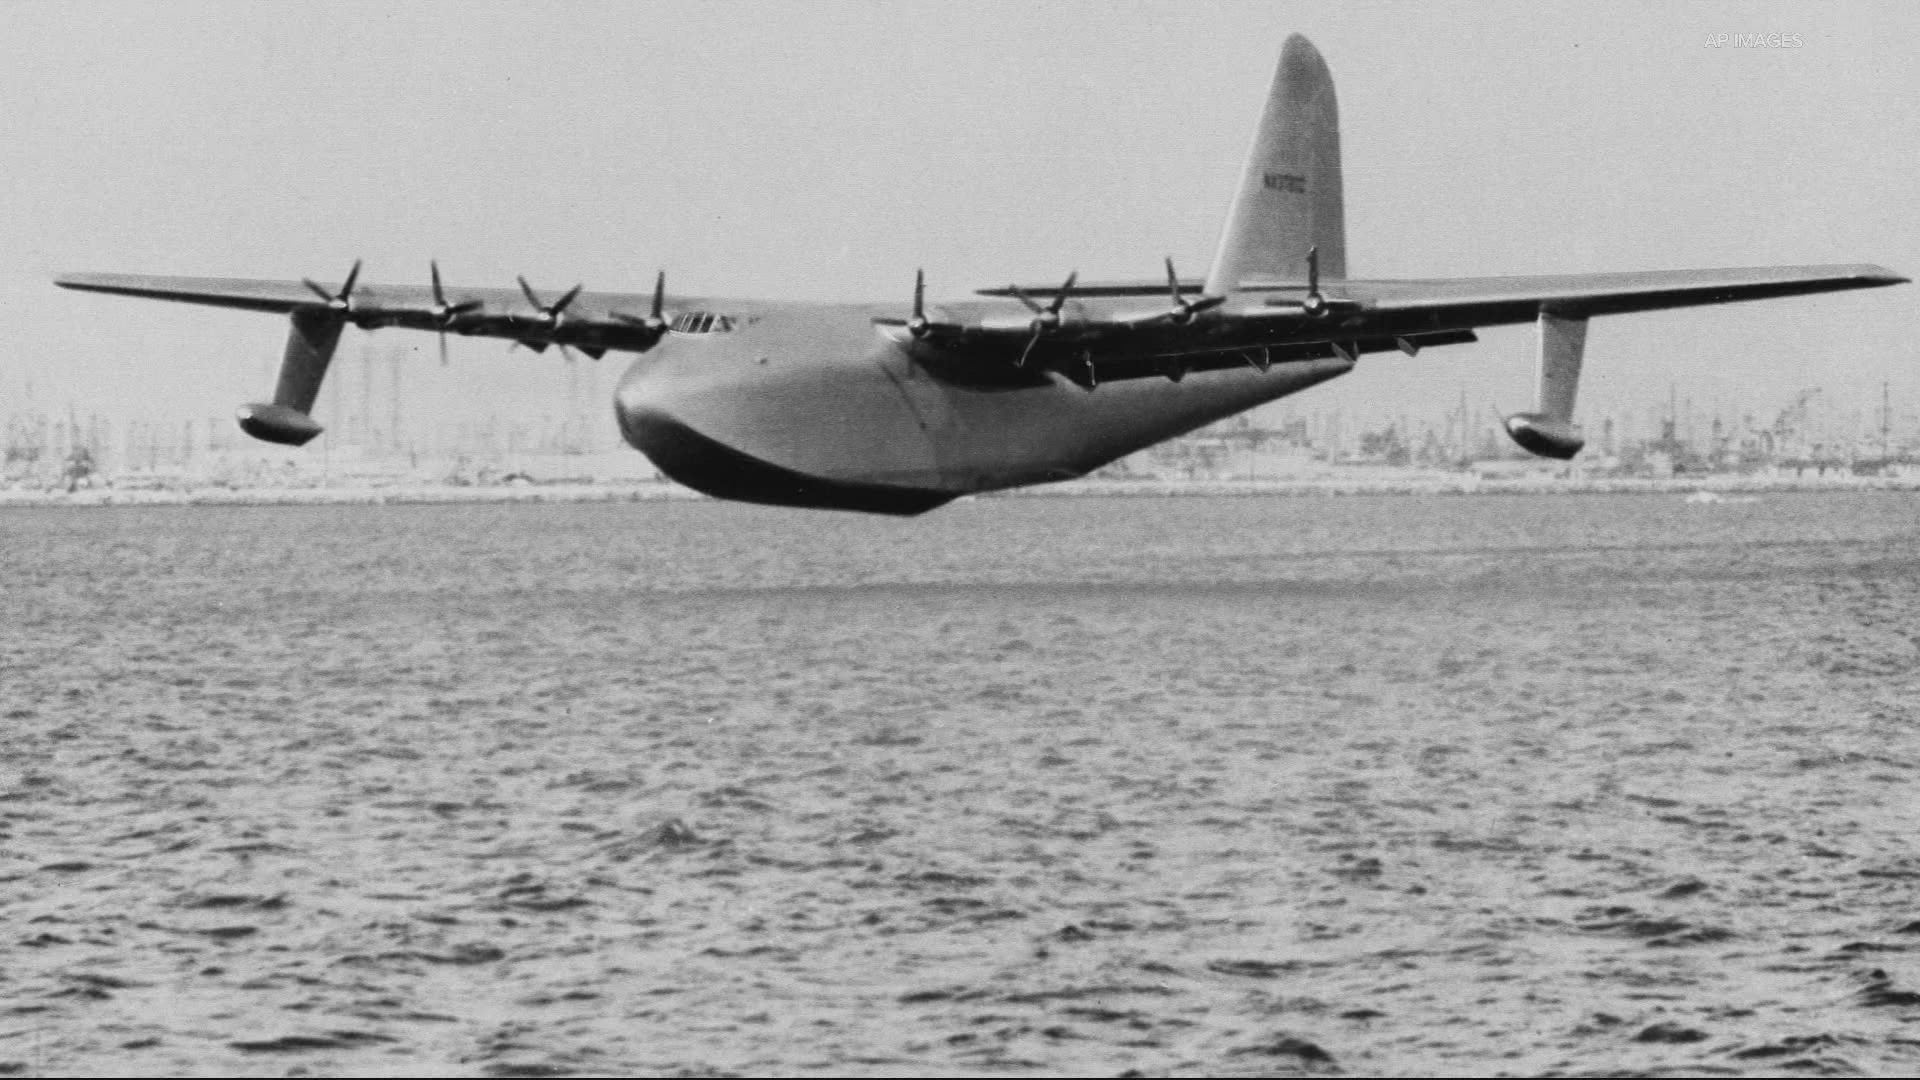 The Spruce Goose, a one-of-a-kind airplane, is on display at the Evergreen Aviation and Space Museum in McMinnville. But how did it gets its name?